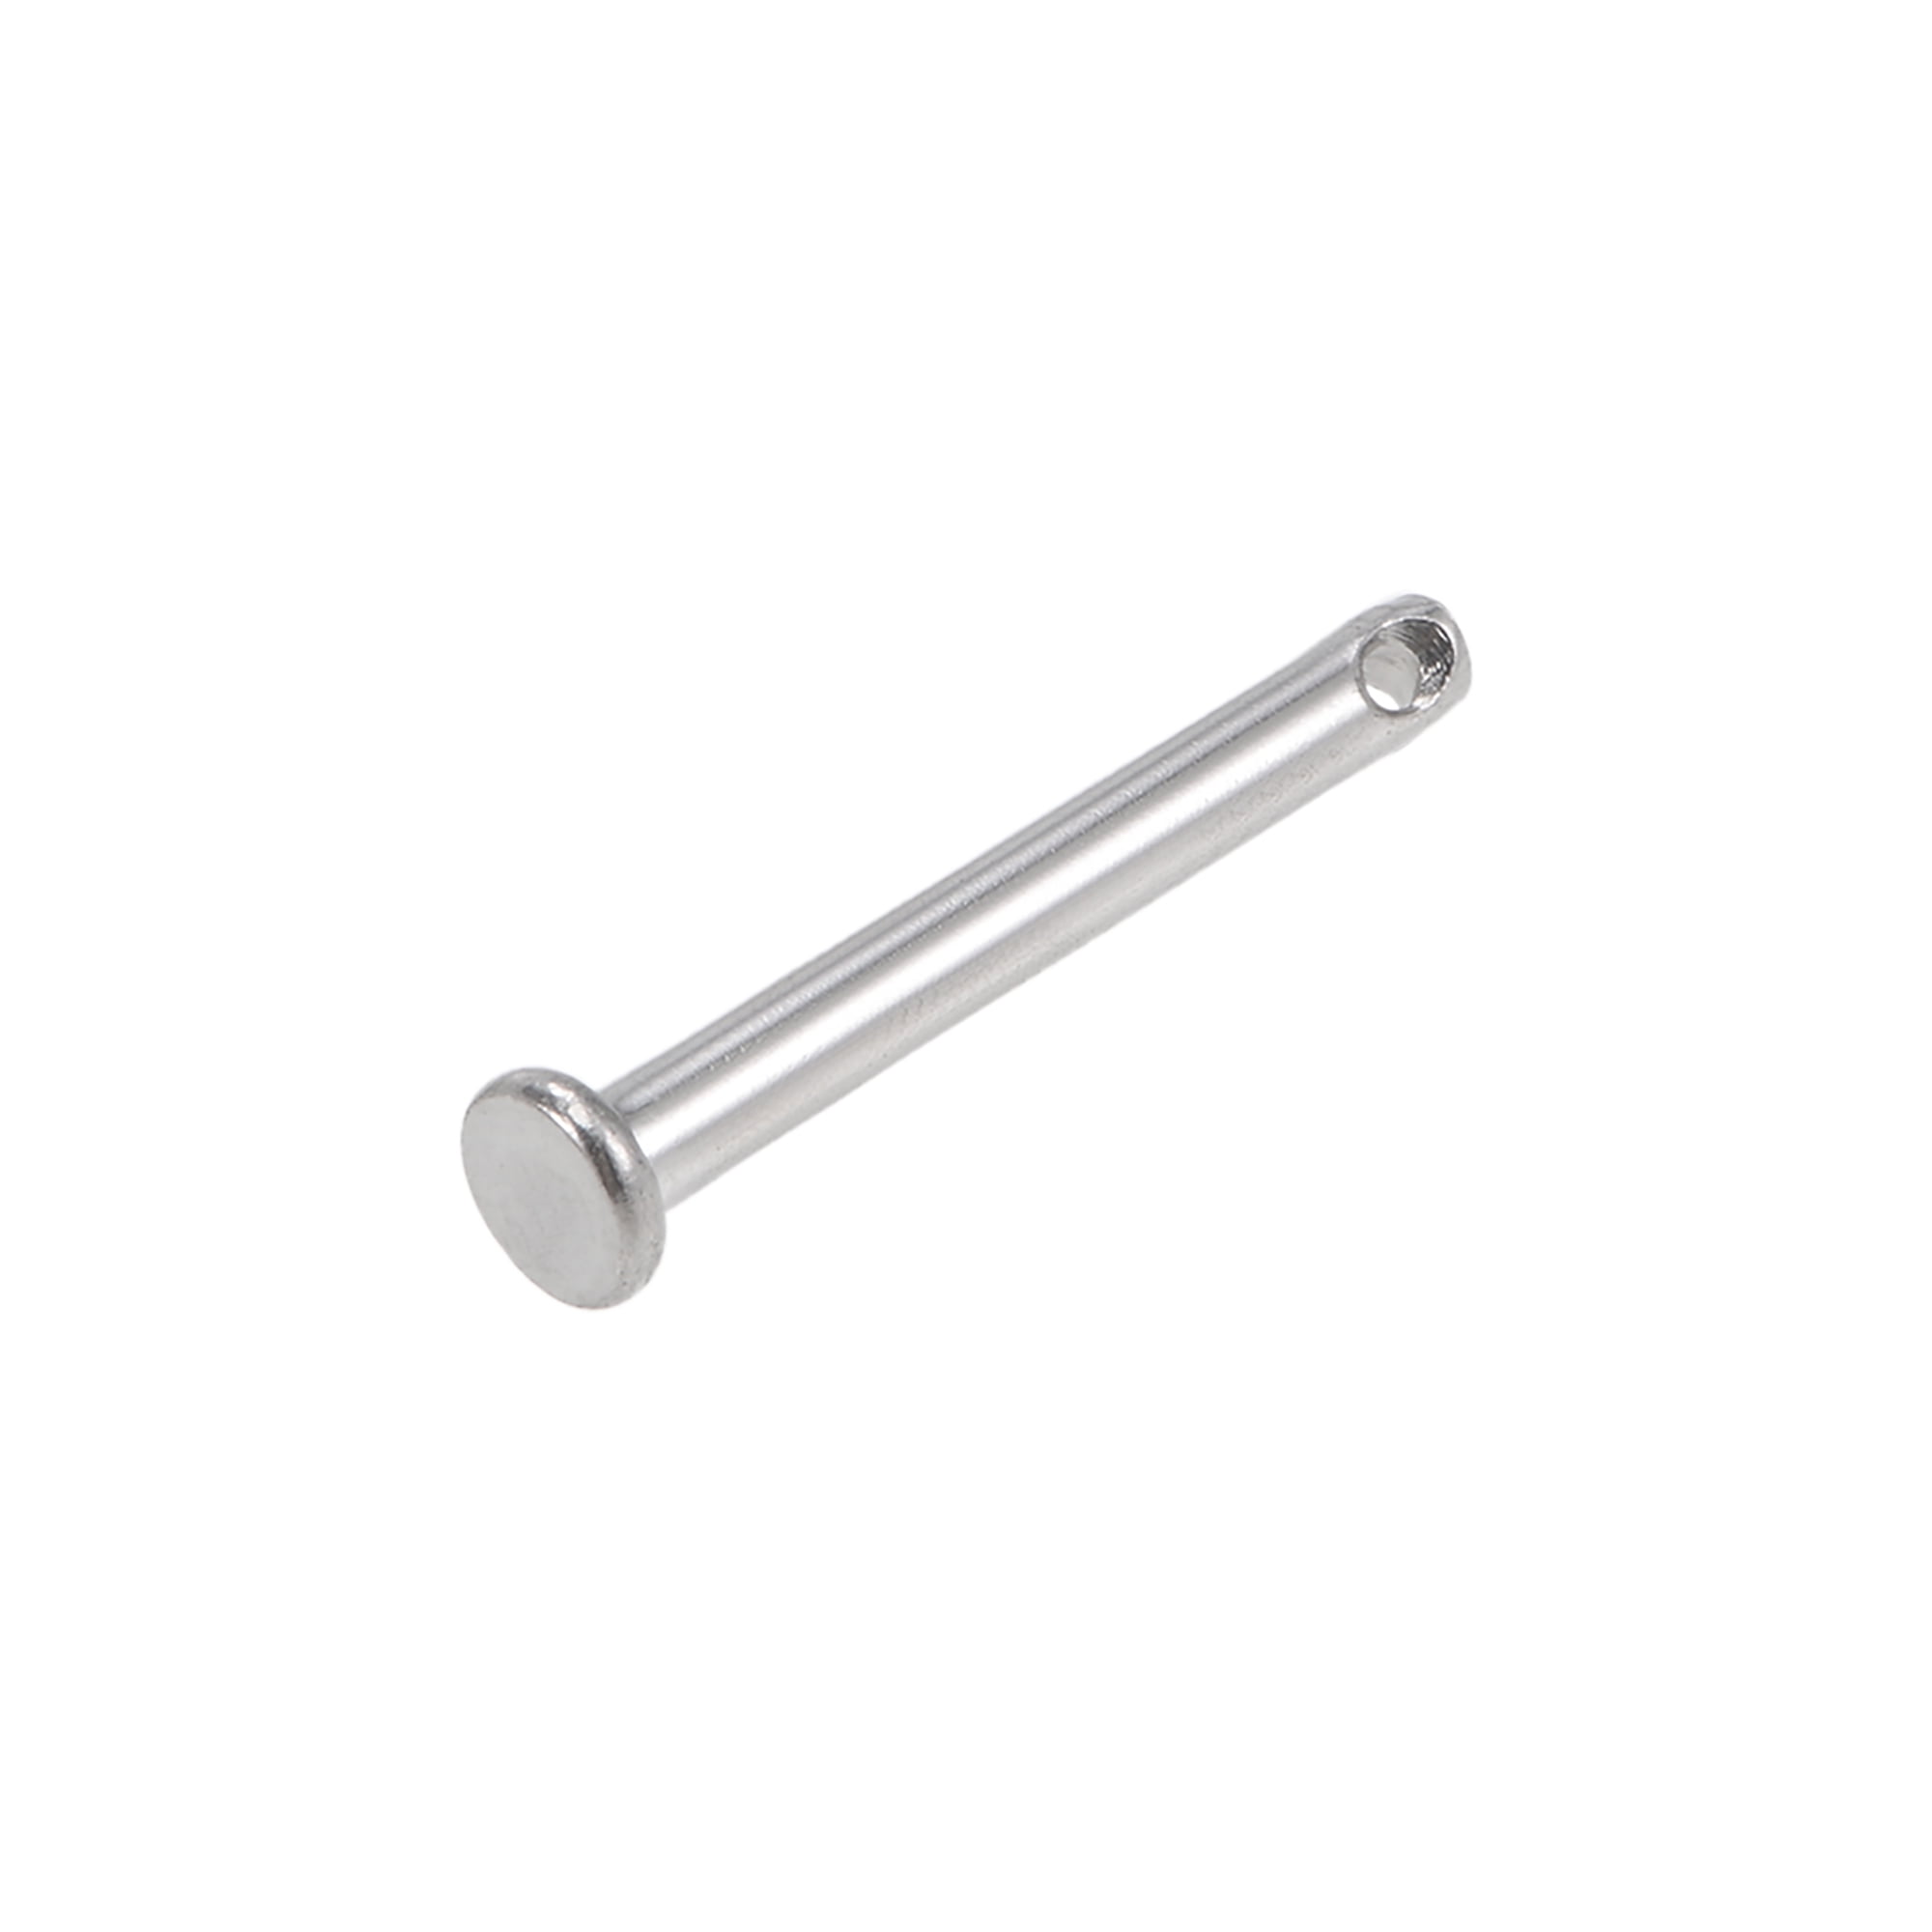 uxcell Single Hole Clevis Pins 10mm X 35mm Flat Head Zinc-Plating Solid Steel Link Hinge Pin 6Pcs 